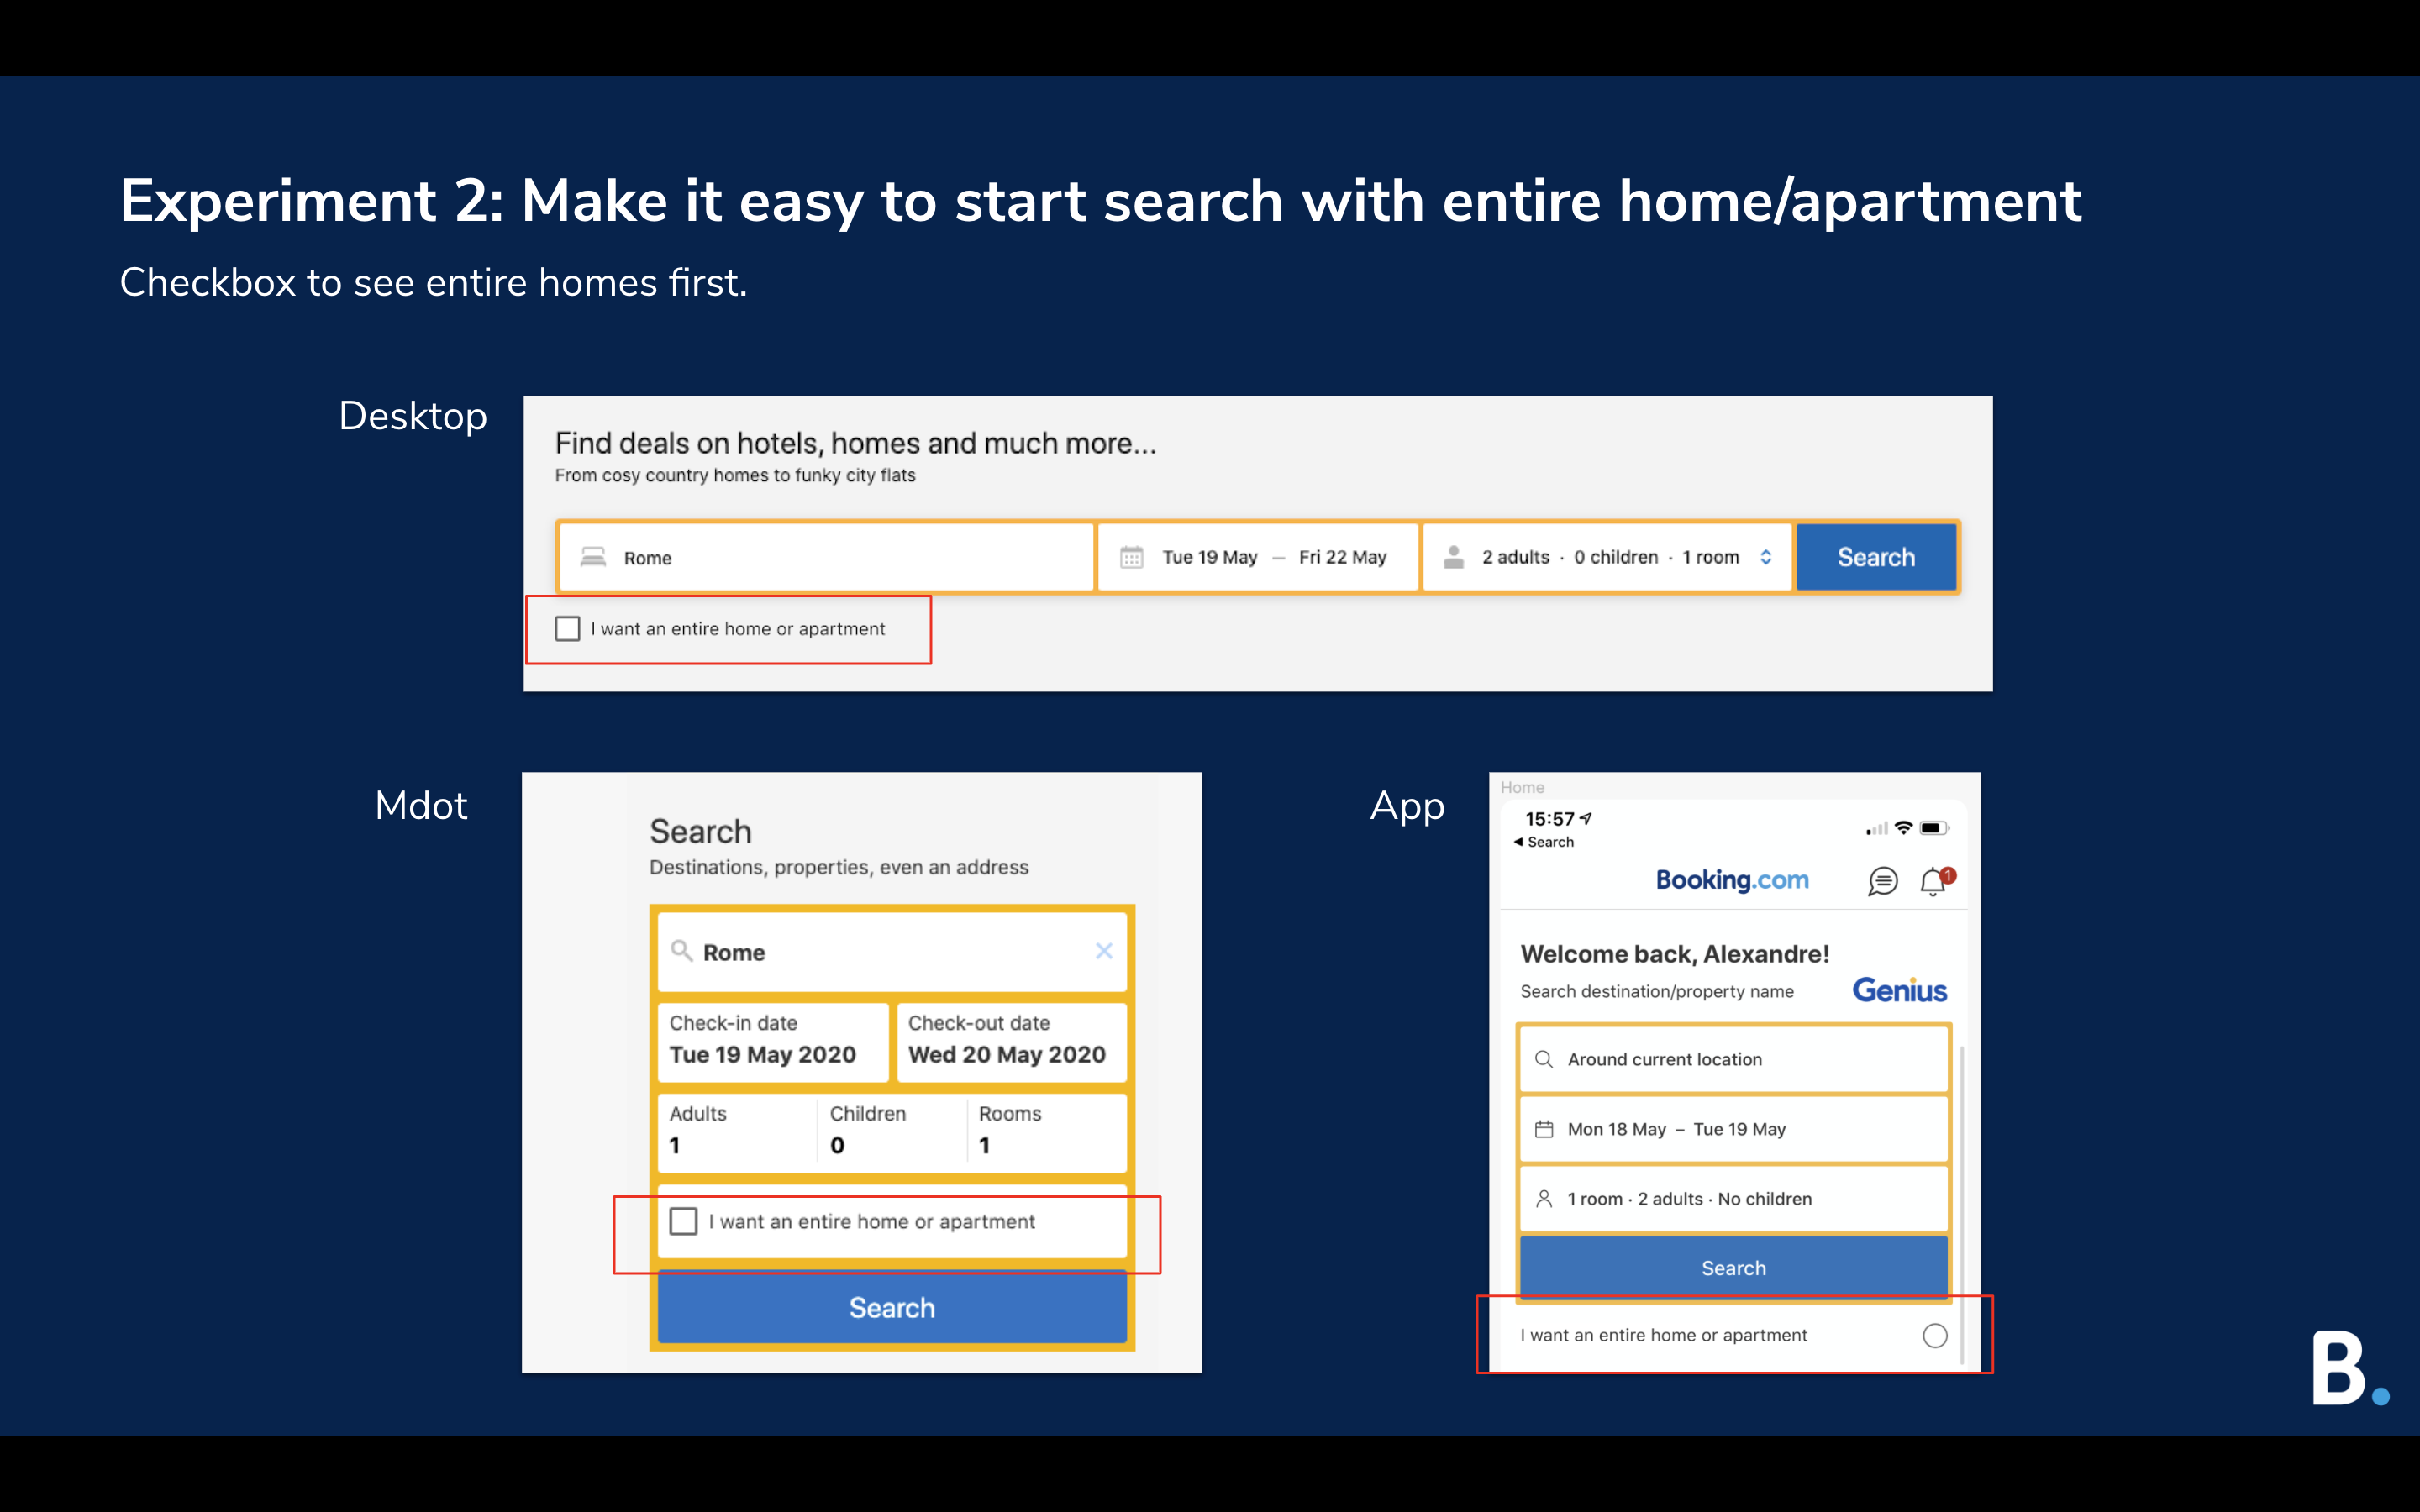 Experiment 2: Make it easy to start search with entire home/apartment